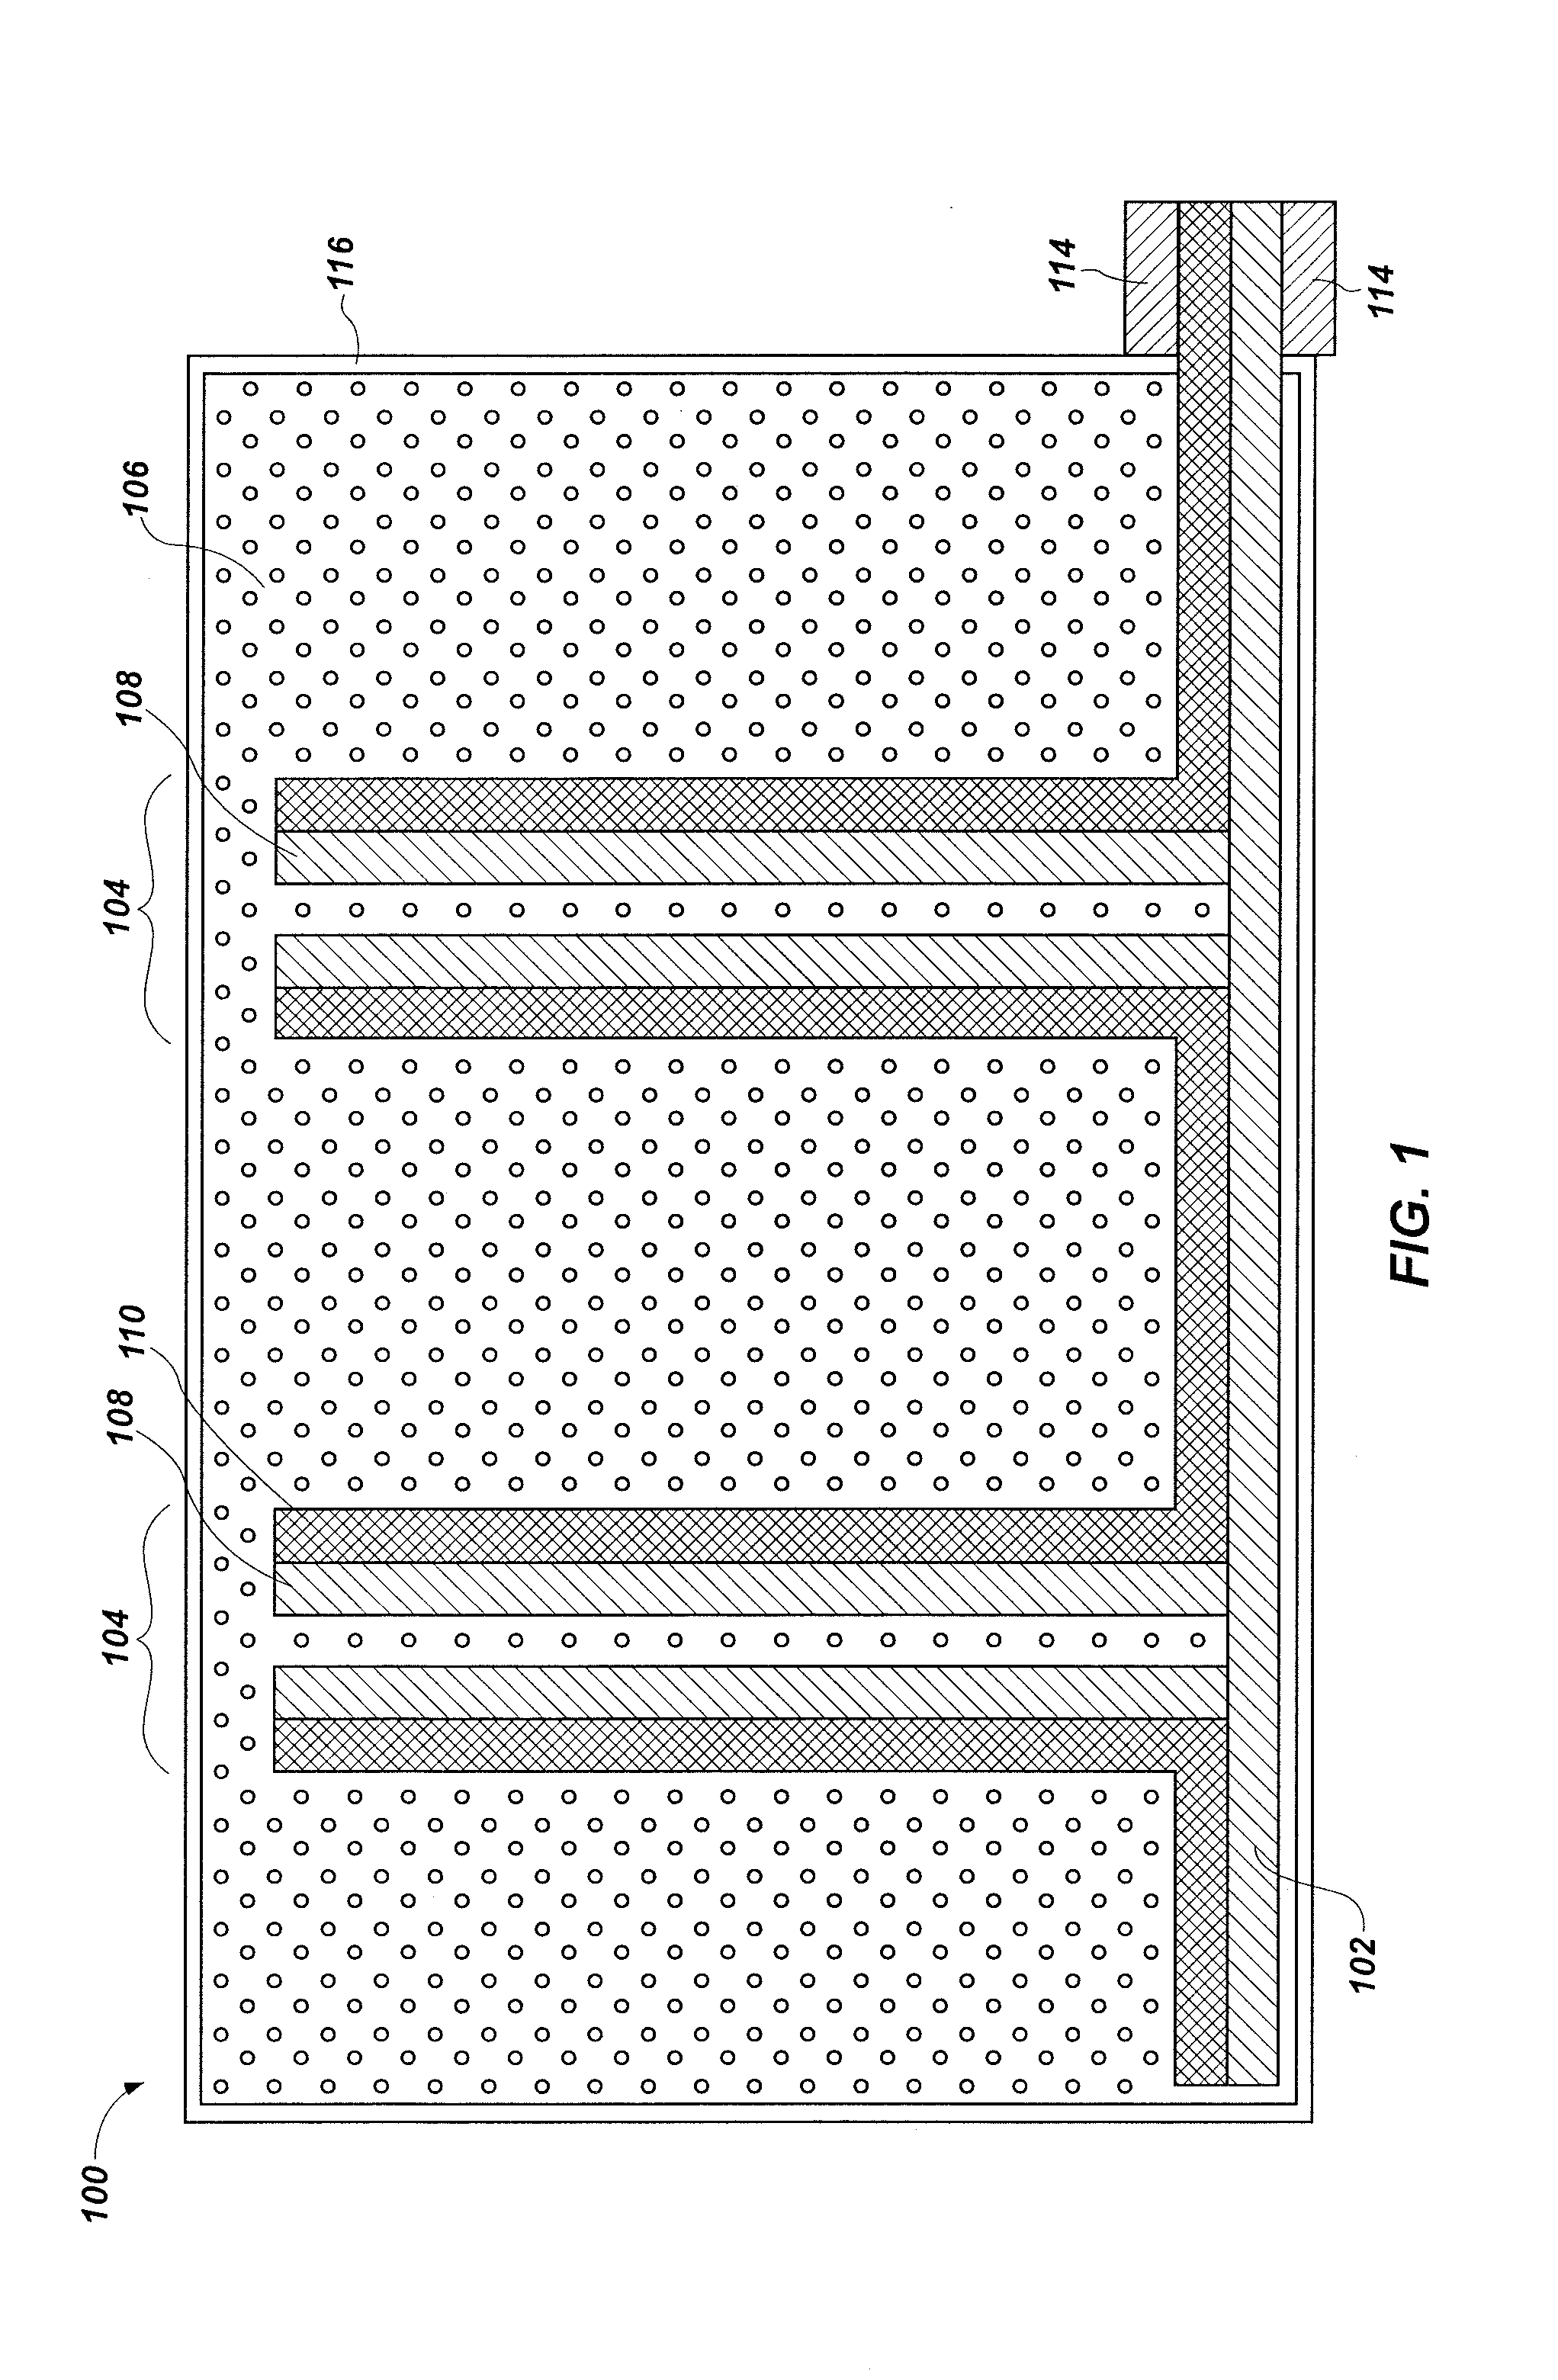 Primary voltaic sources including nanofiber schottky barrier arrays and methods of forming same